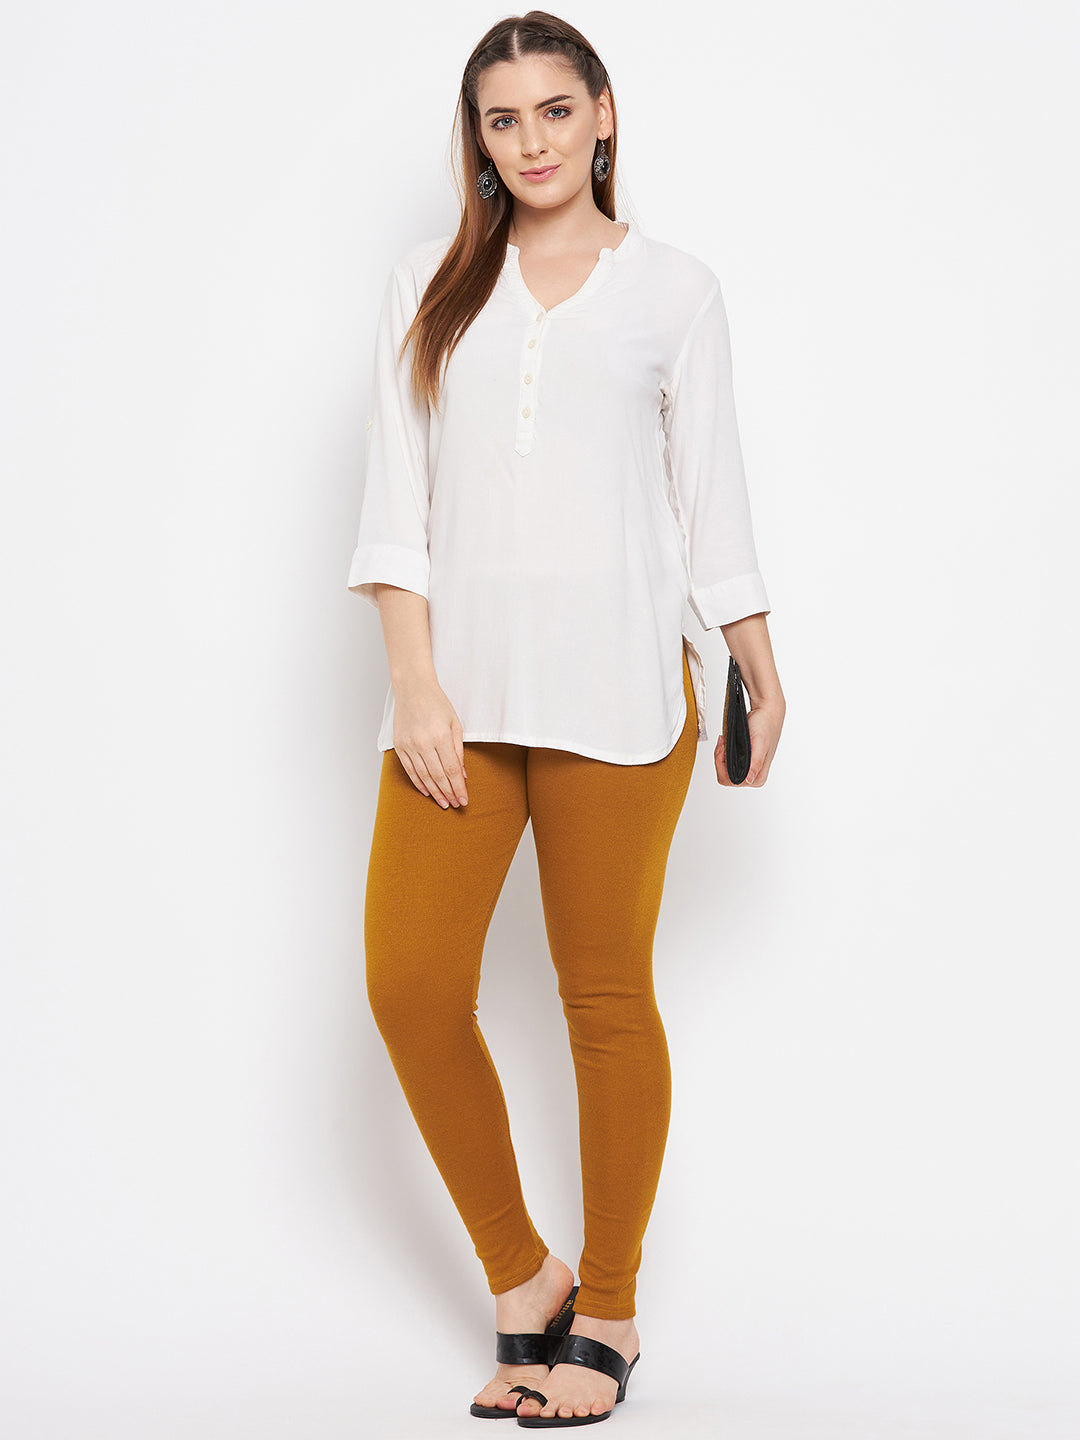 Buy Clora Mustard & Light Fawn Solid Woolen Leggings (Pack Of 2)Online at  Best Price - Clora Creation